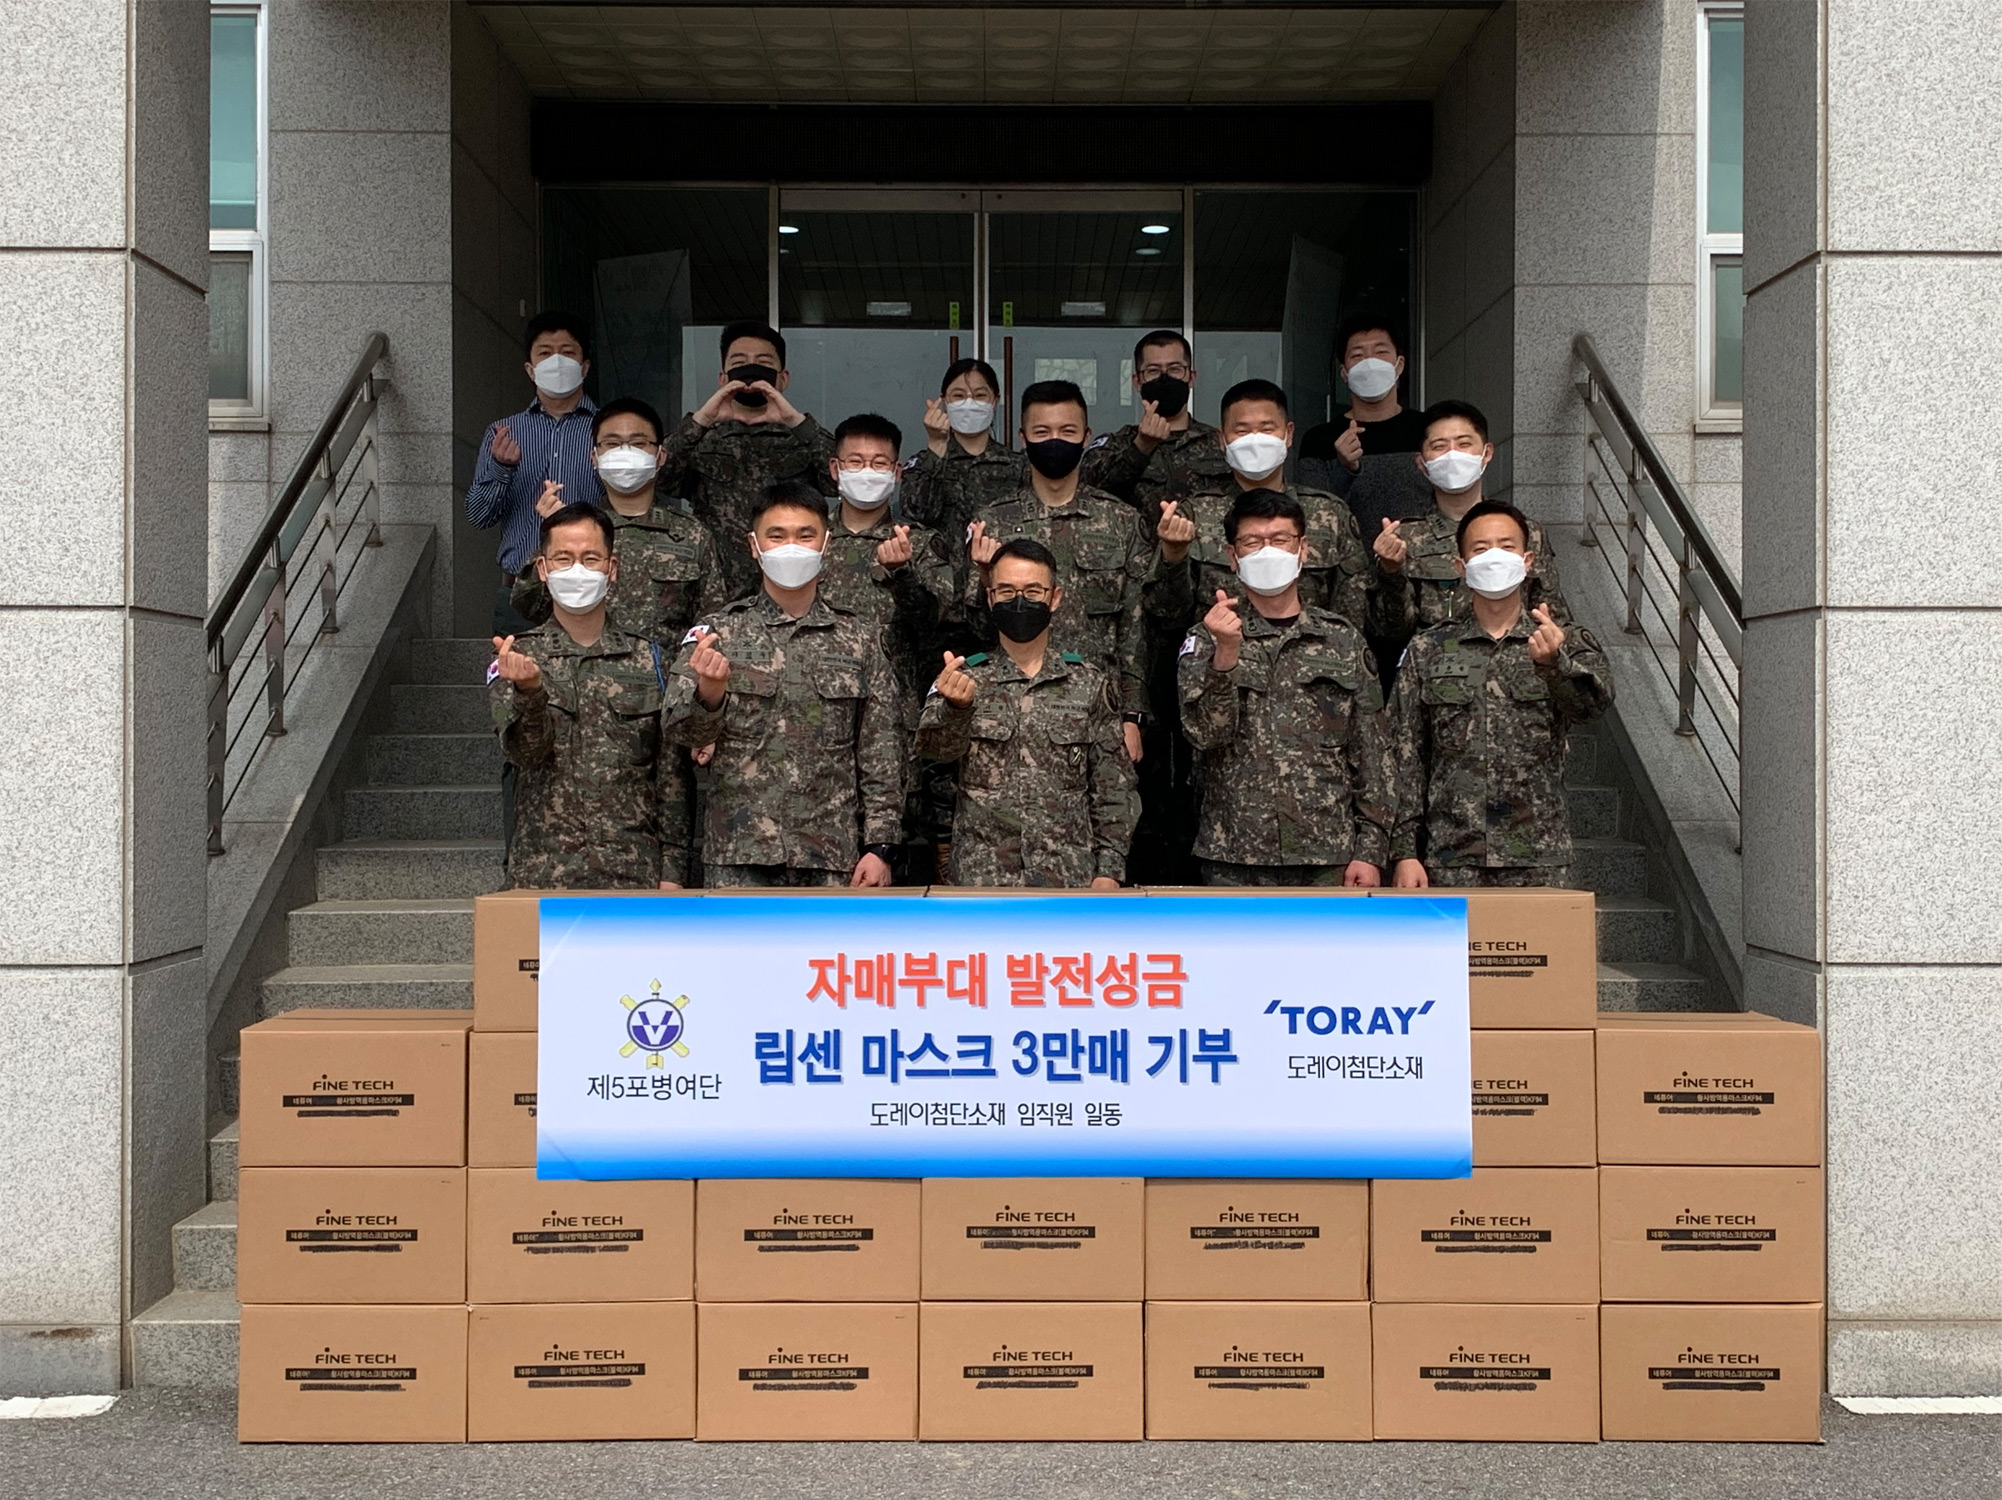 TAK delivers development donations and 30,000 pieces of masks to Sisterhood Army